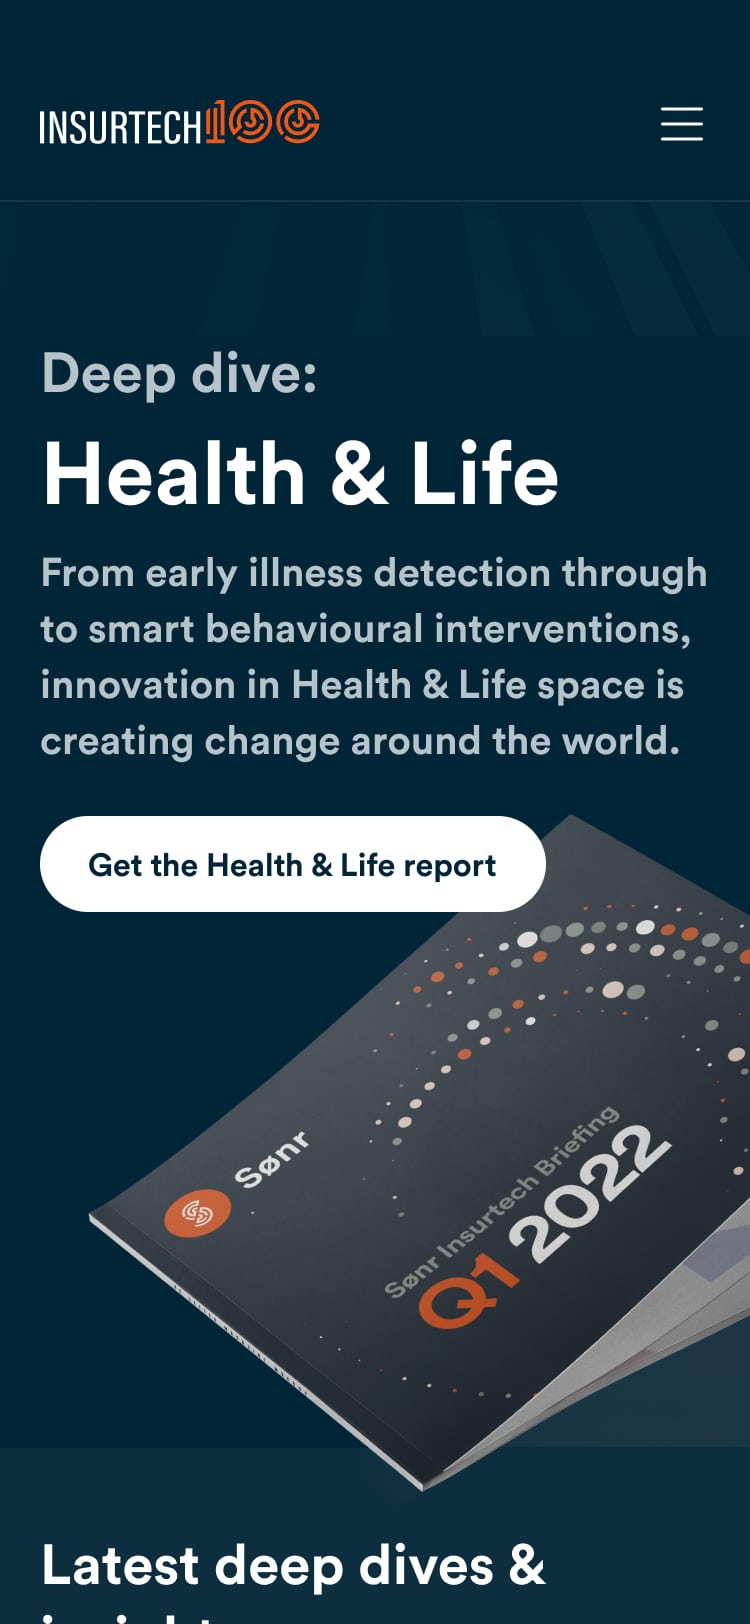 A quarterly report landing page from the Sønr Insurtech 100 site running on a smartphone.